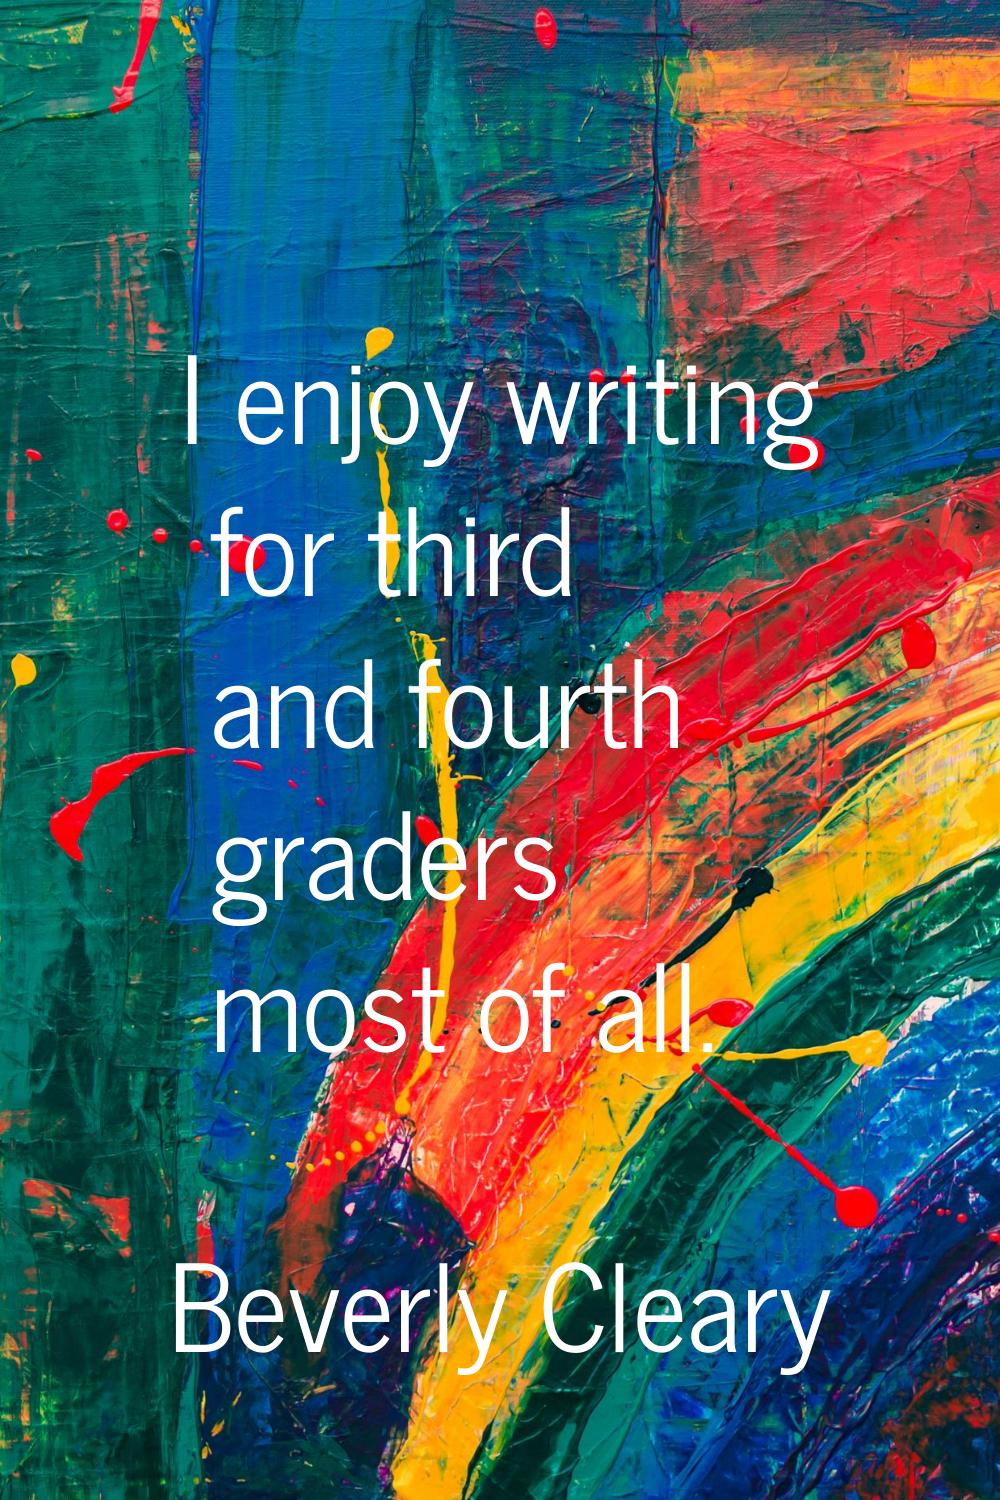 I enjoy writing for third and fourth graders most of all.